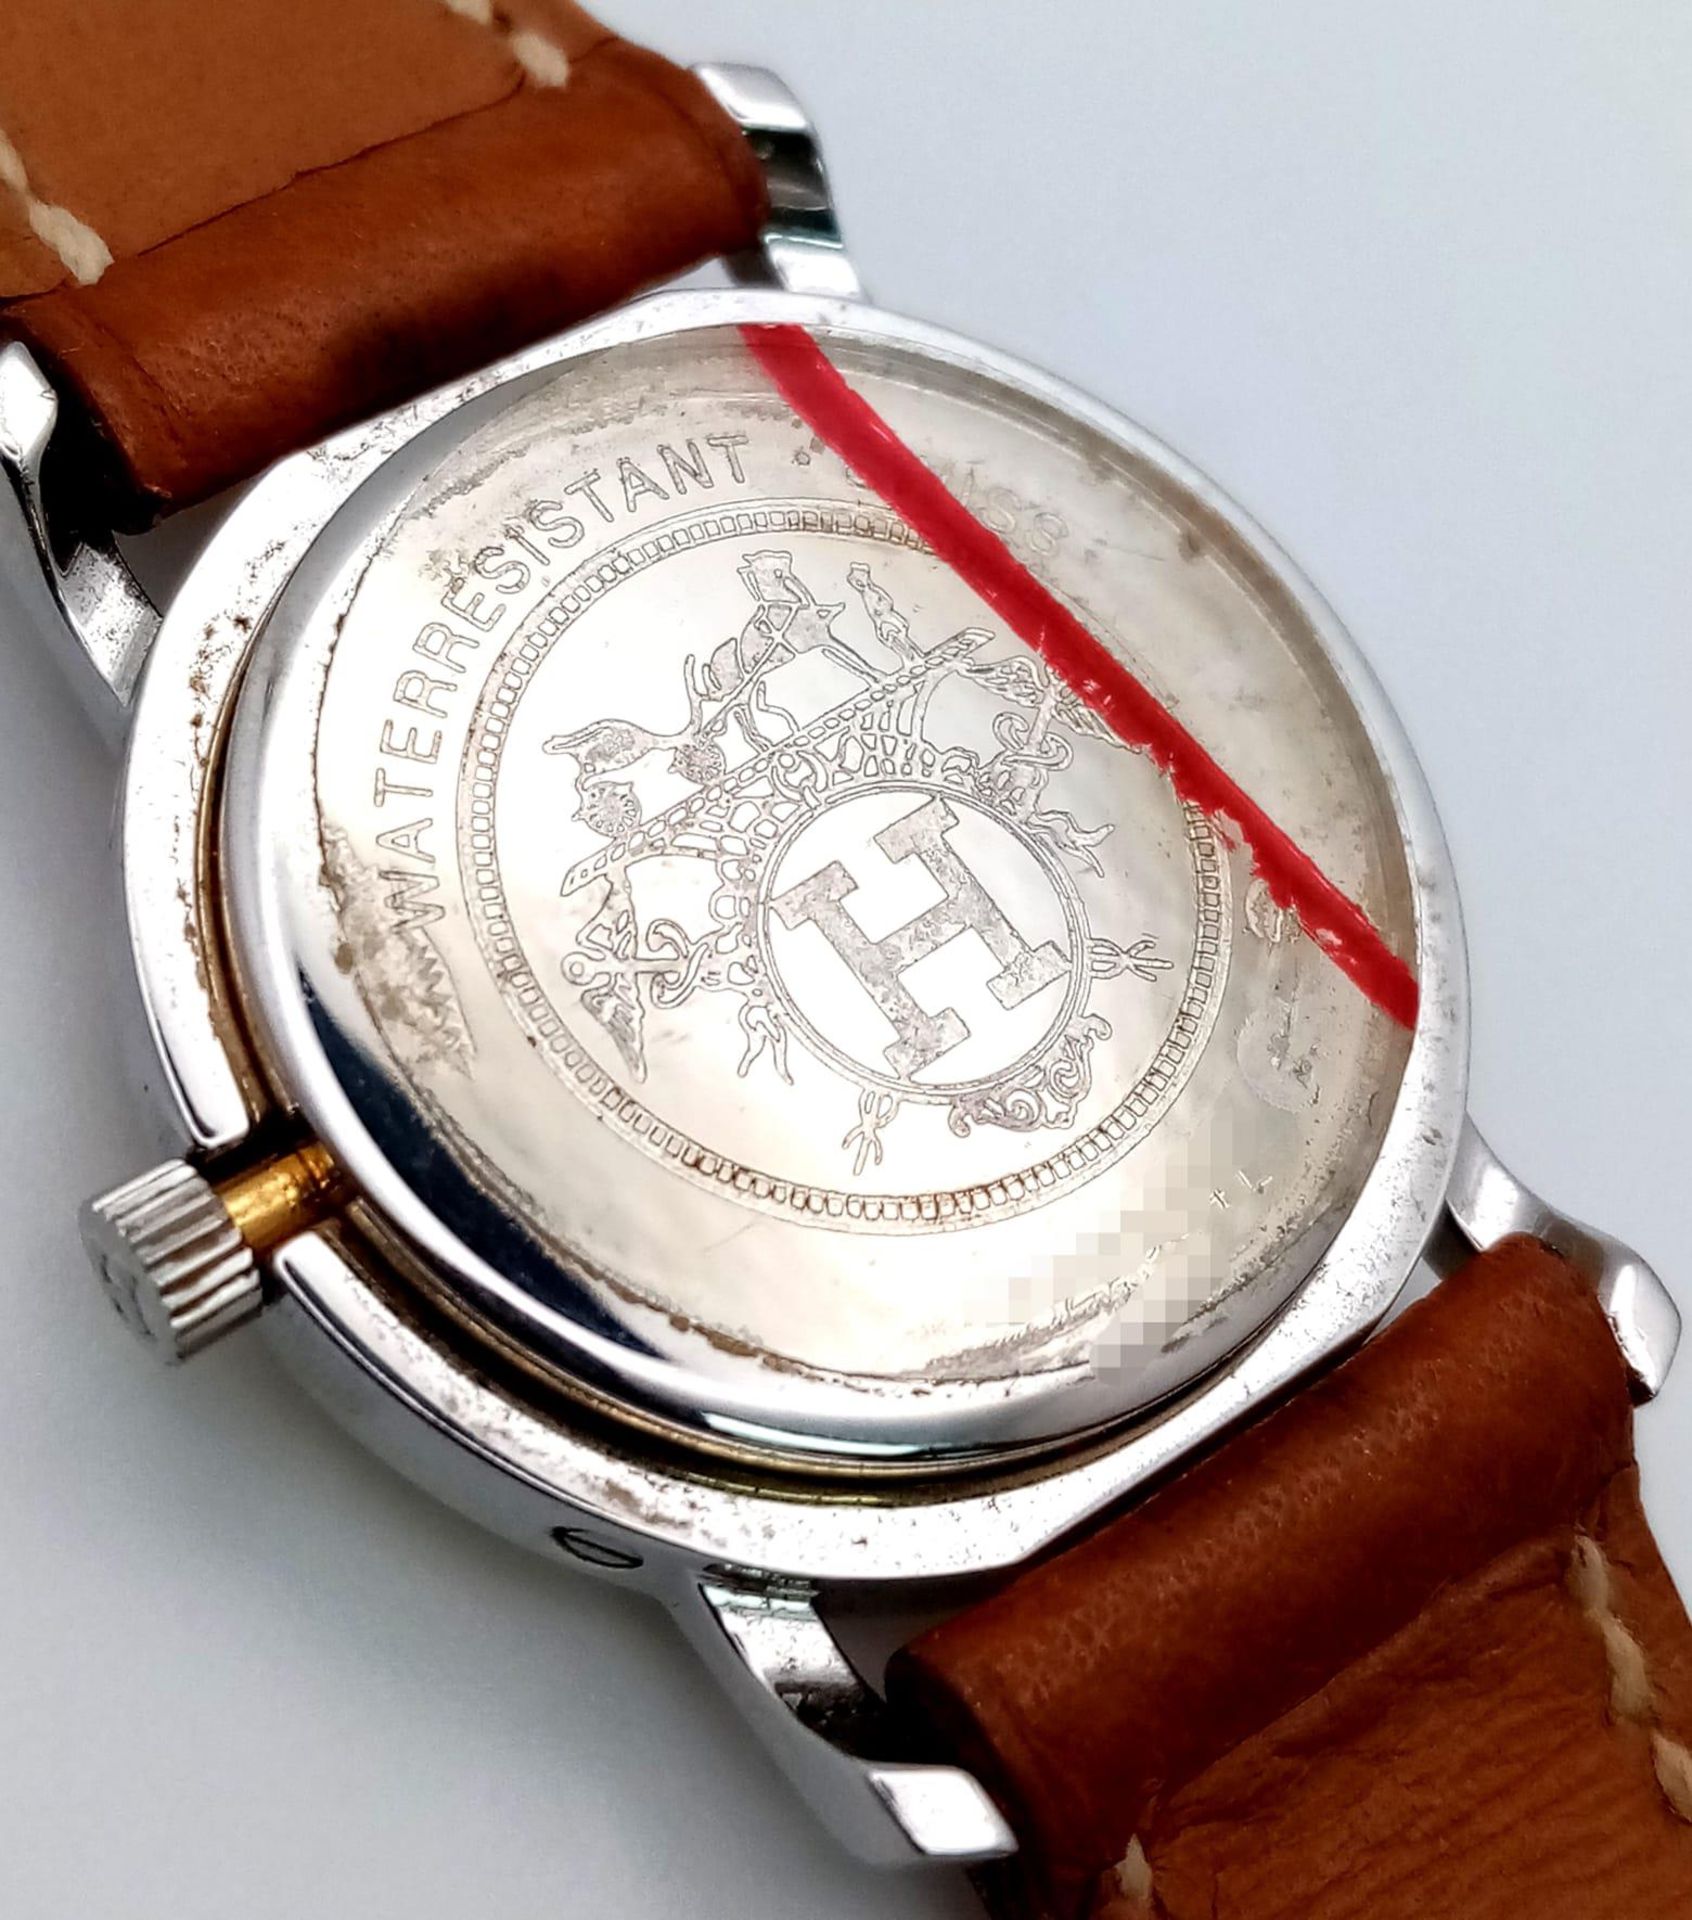 A FABULOUS HERMES OF PARIS LADIES WRISTWATCH WITH GOLD AND STAINLESS STEEL BODY AND TASTEFUL CREAM - Image 6 of 8